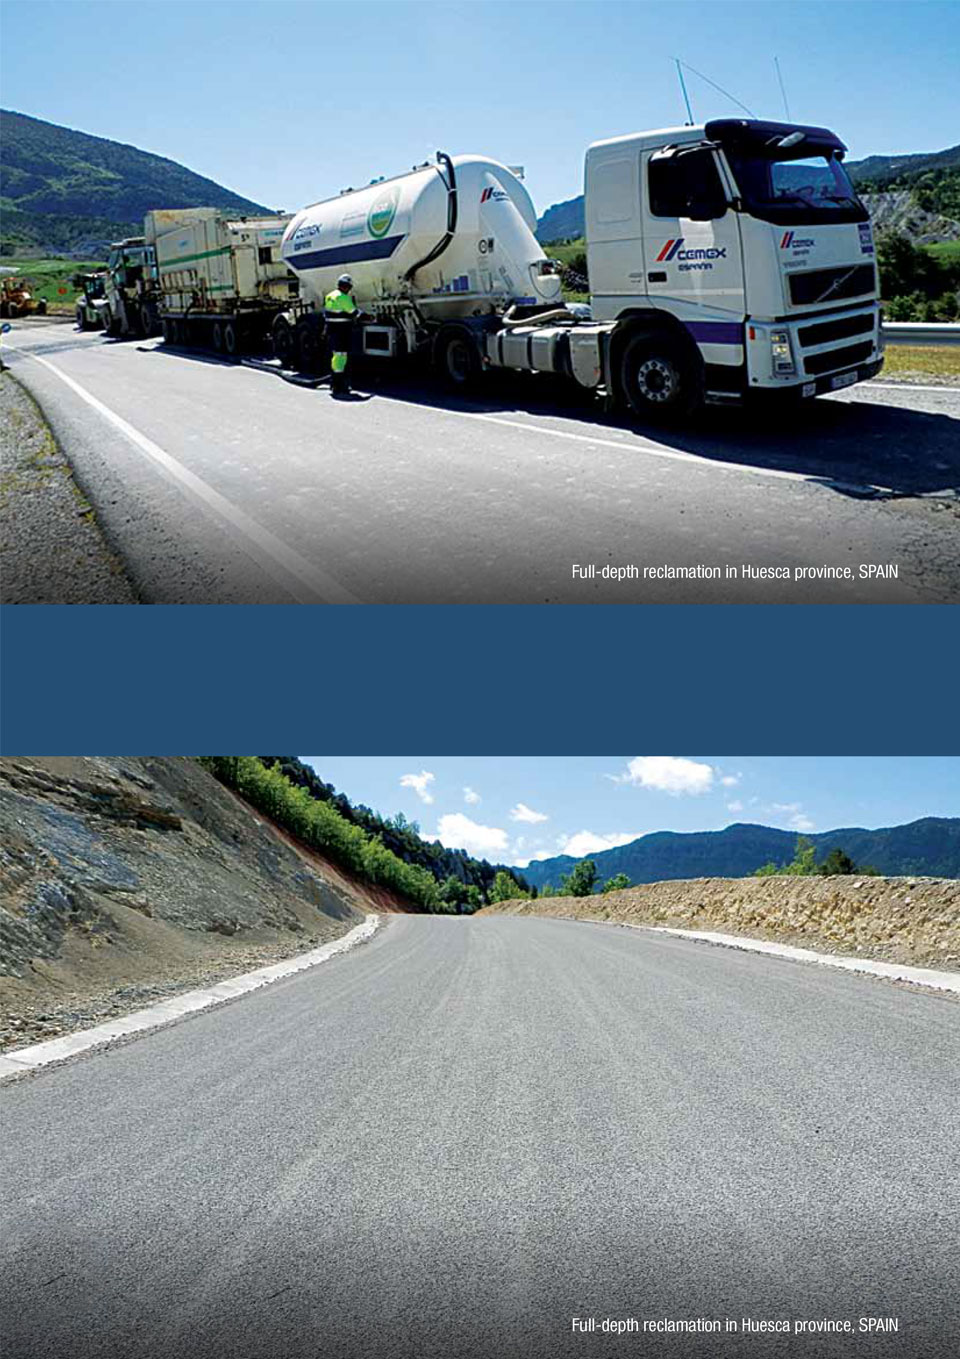 the image shows a road being treated by CEMEX